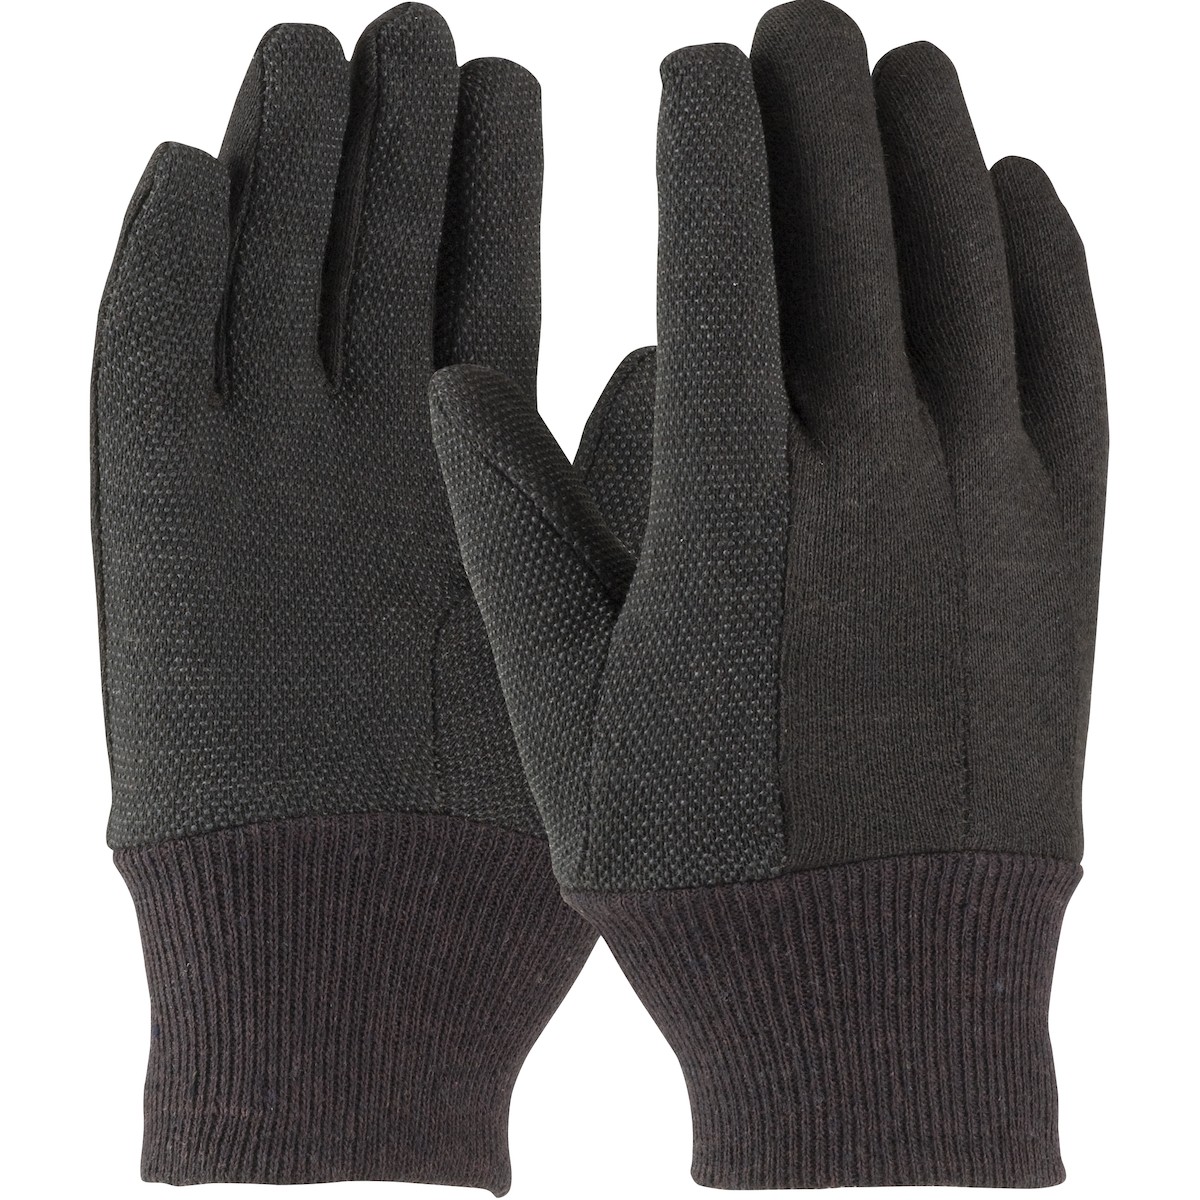 PIP® Regular Weight Polyester/Cotton Jersey Glove with PVC Dotted Grip - Ladies'  (#95-809PDC)